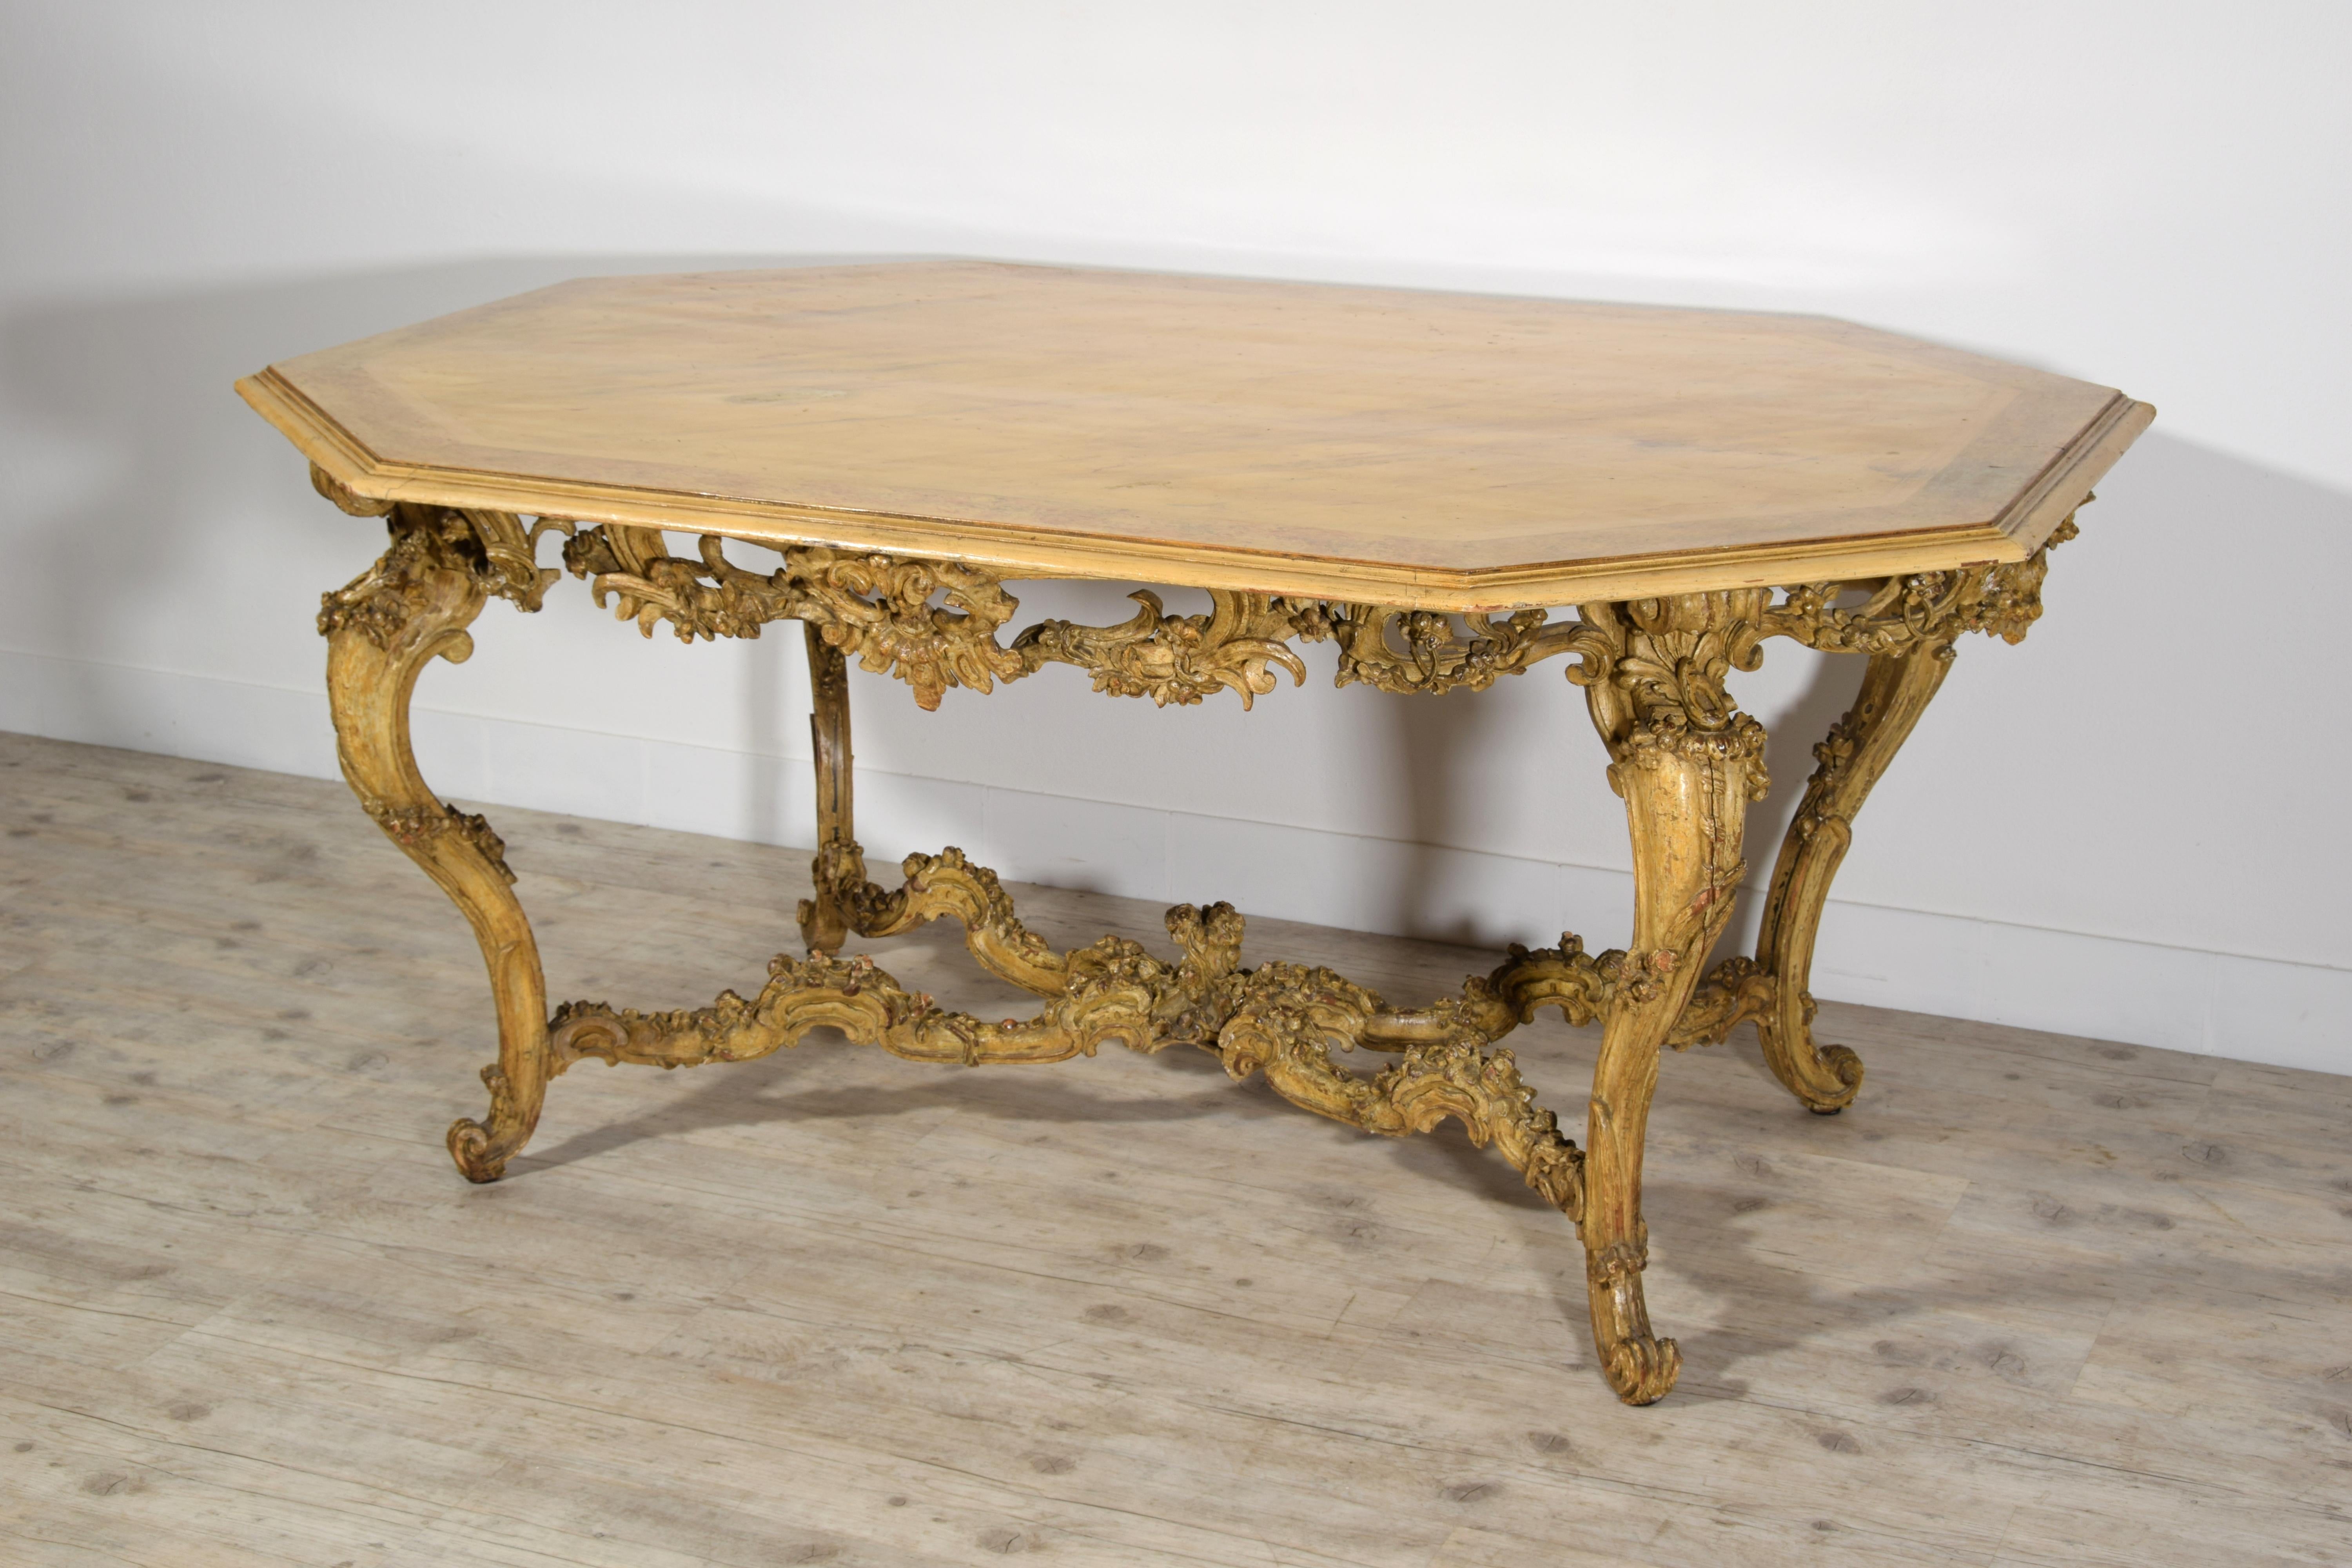 Italian Baroque Carved Gilt and Lacquered Wood Center Table, 18th Century For Sale 5